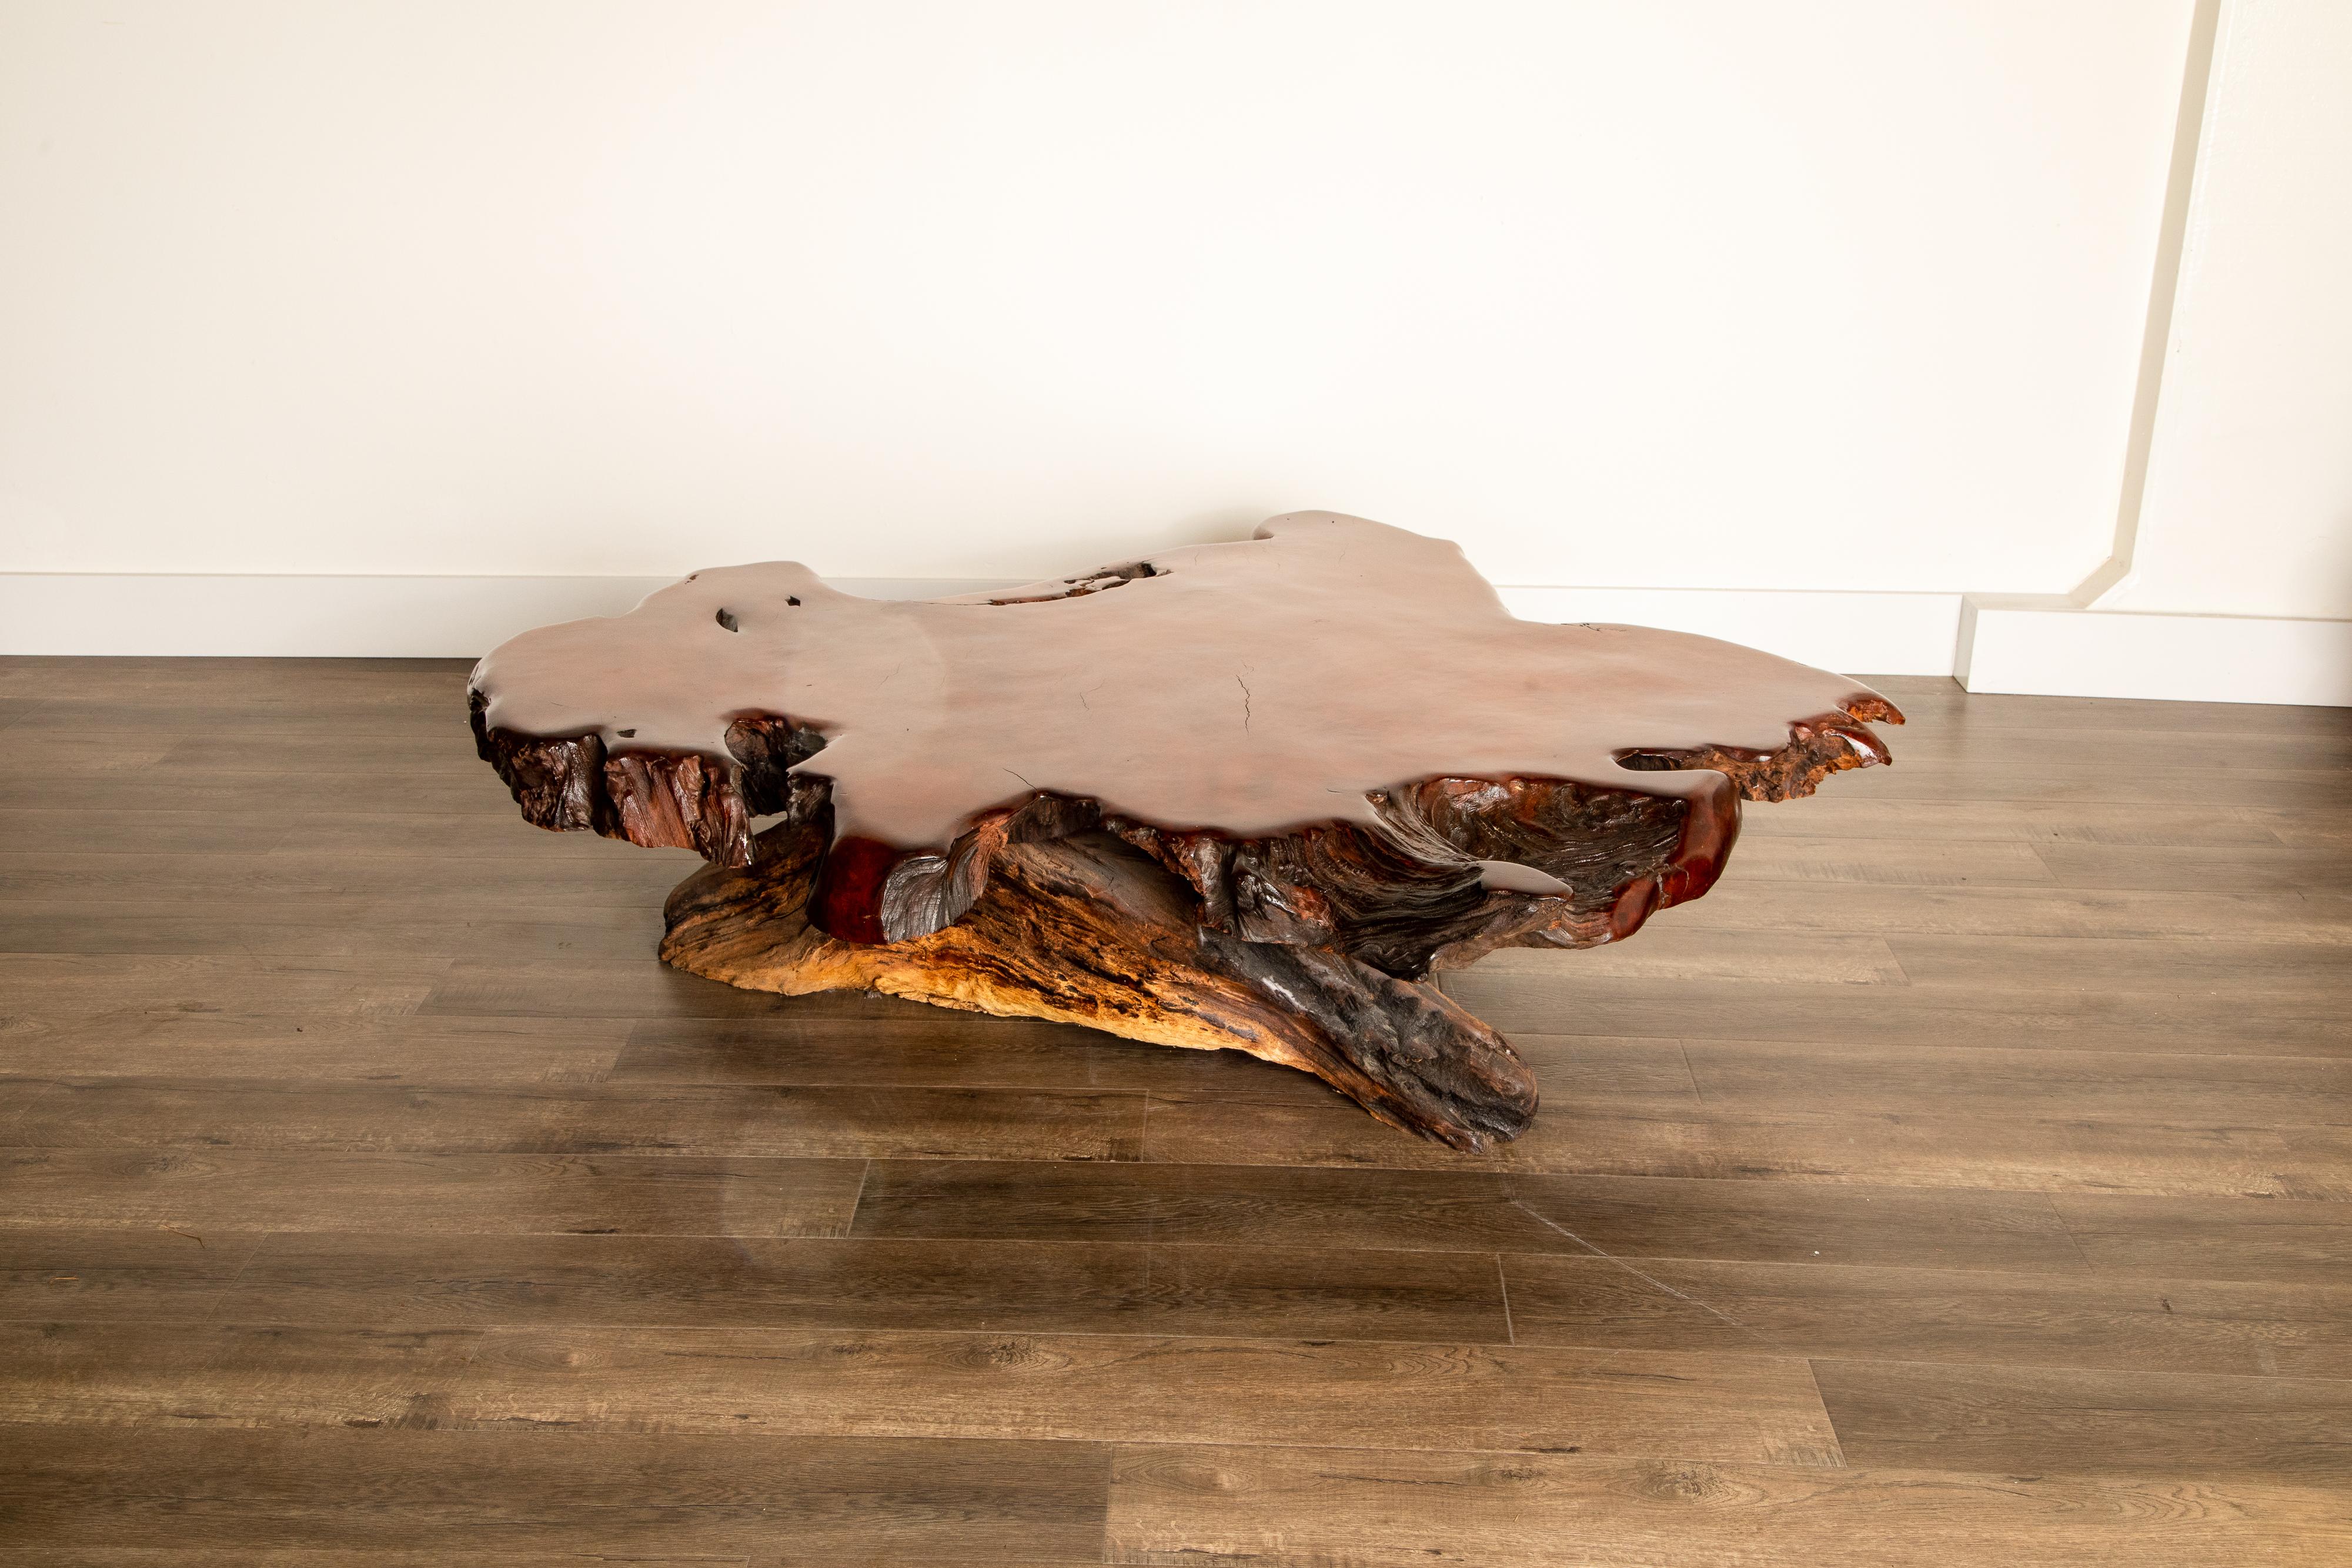 Extraordinary artisan coffee table handcrafted from naturally free-formed burl redwood which has been polished and worked into an impressive occasional table, created by California artist sculptor Daryl Stokes in the 1970s. The naturally twisted